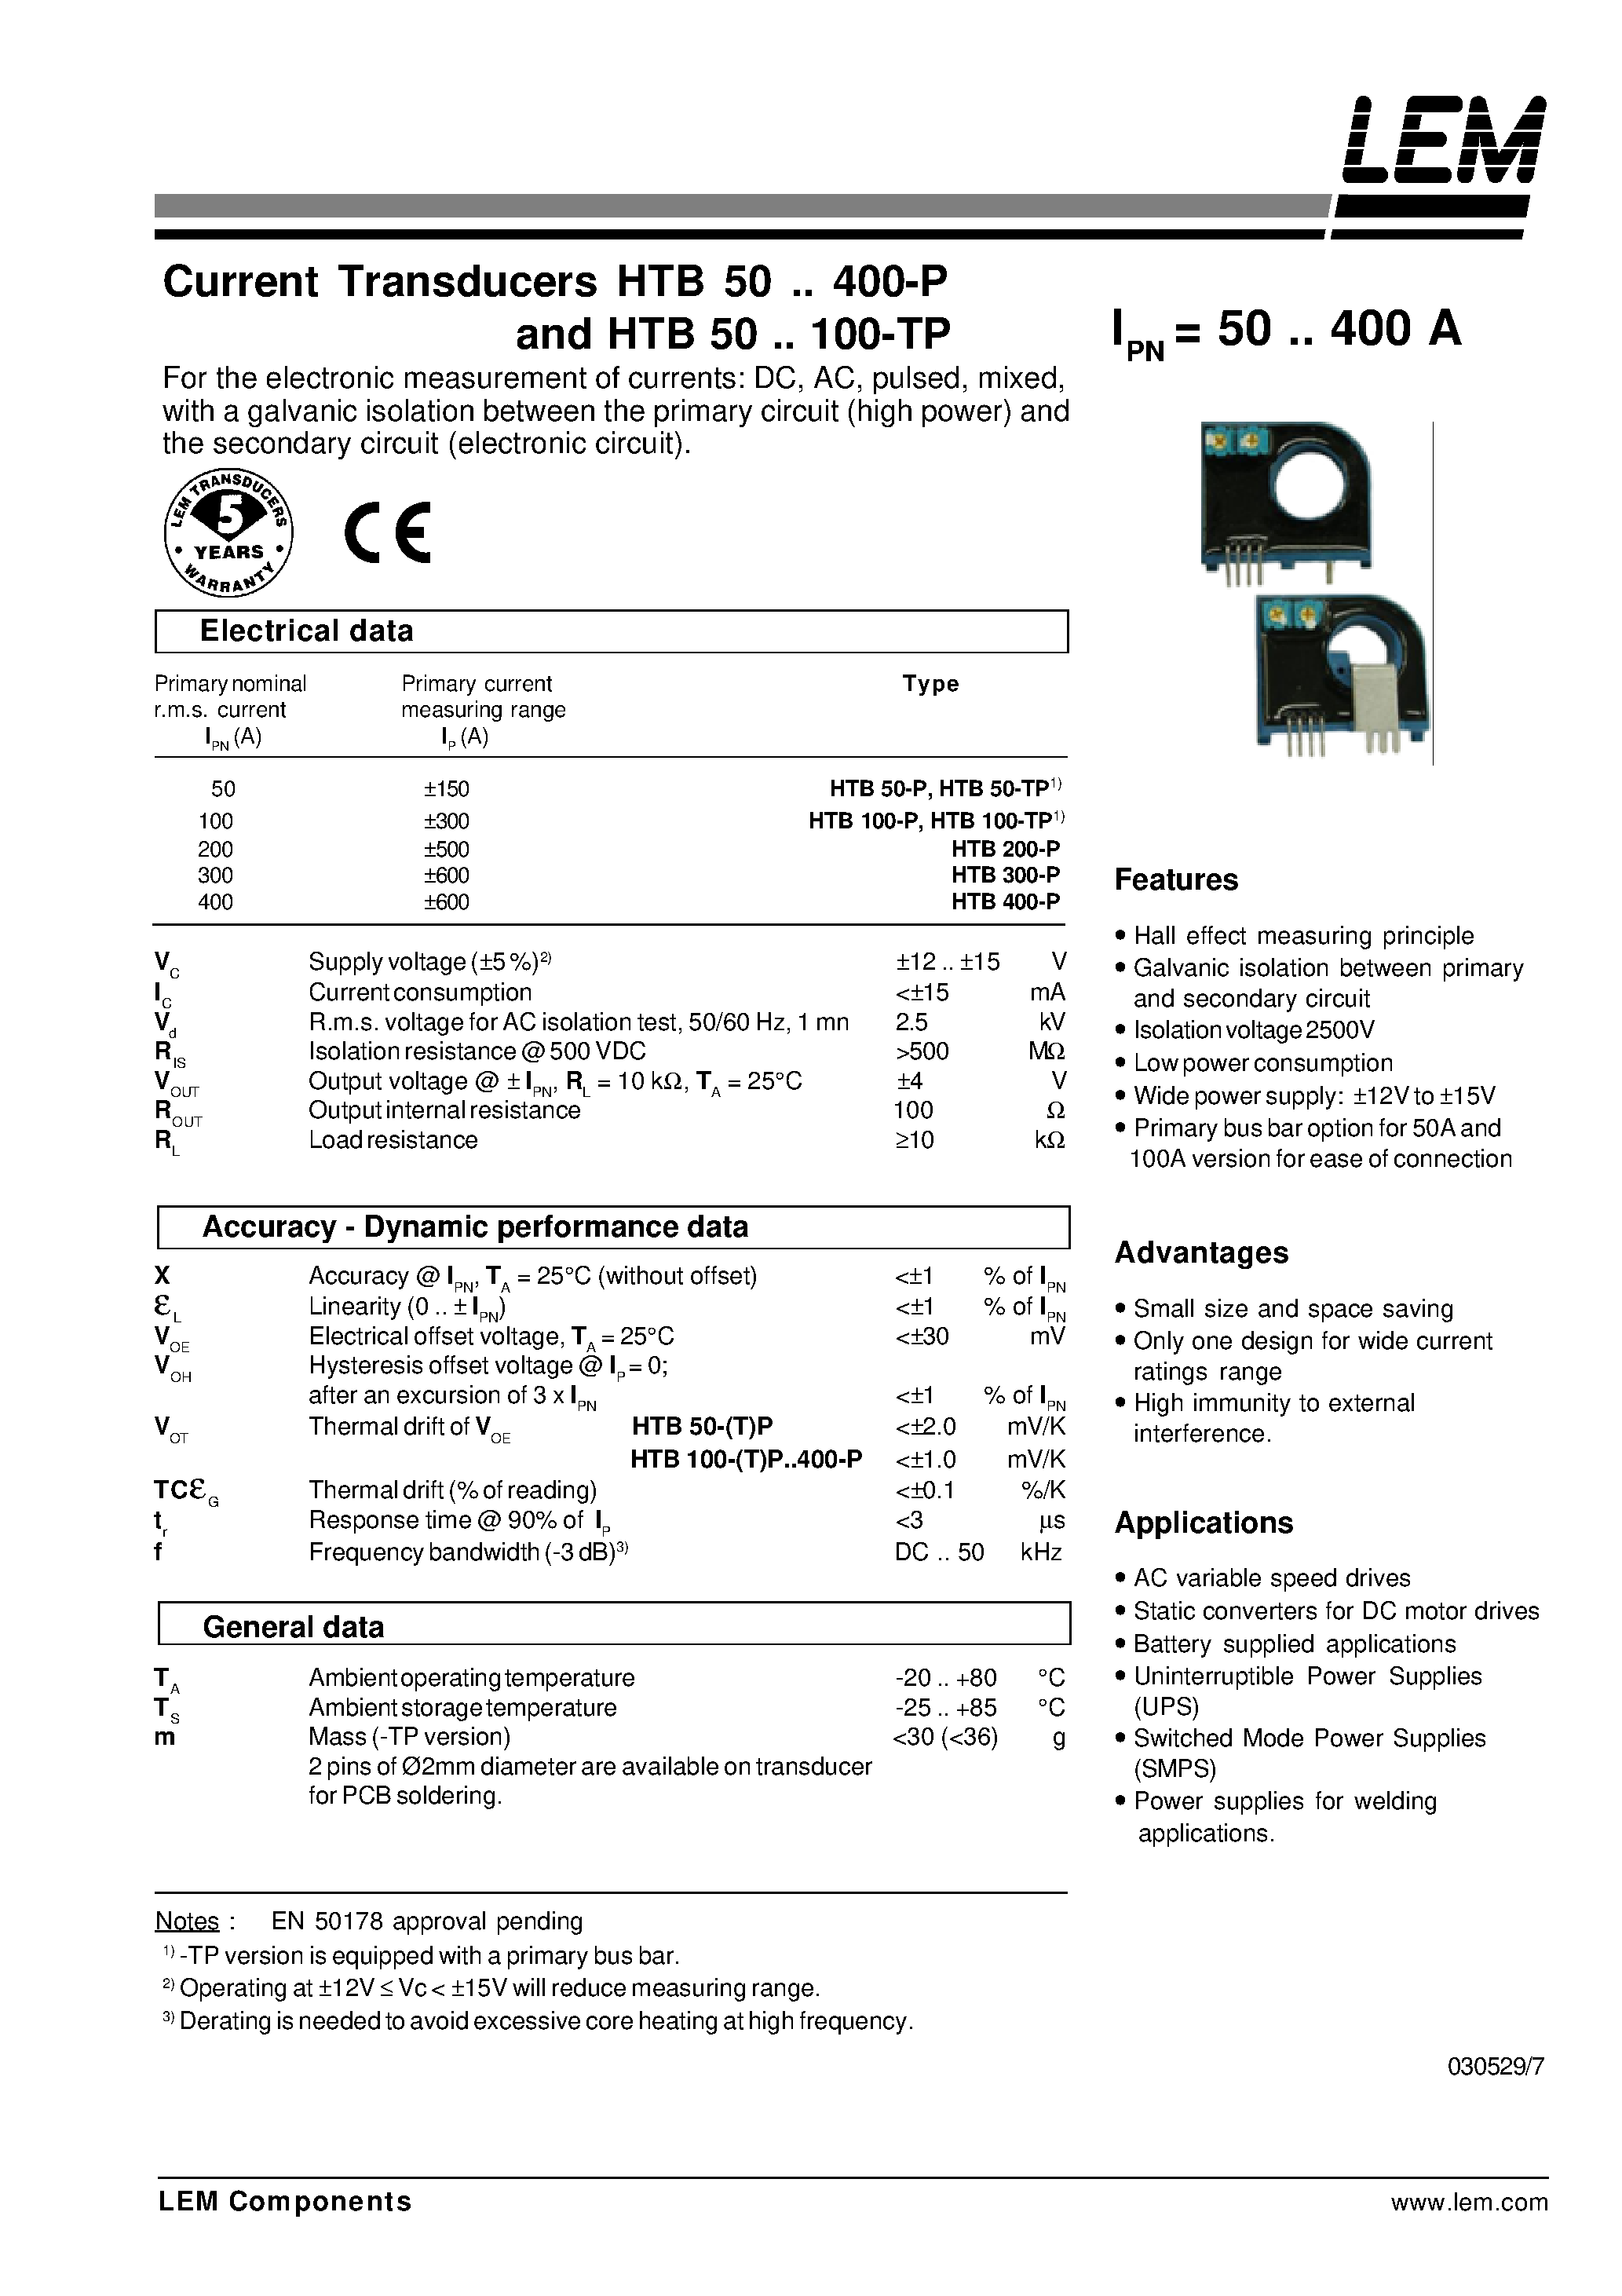 Datasheet HTB400-P - Current Transducers HTB 50~400-P and HTB 50~100-TP page 1